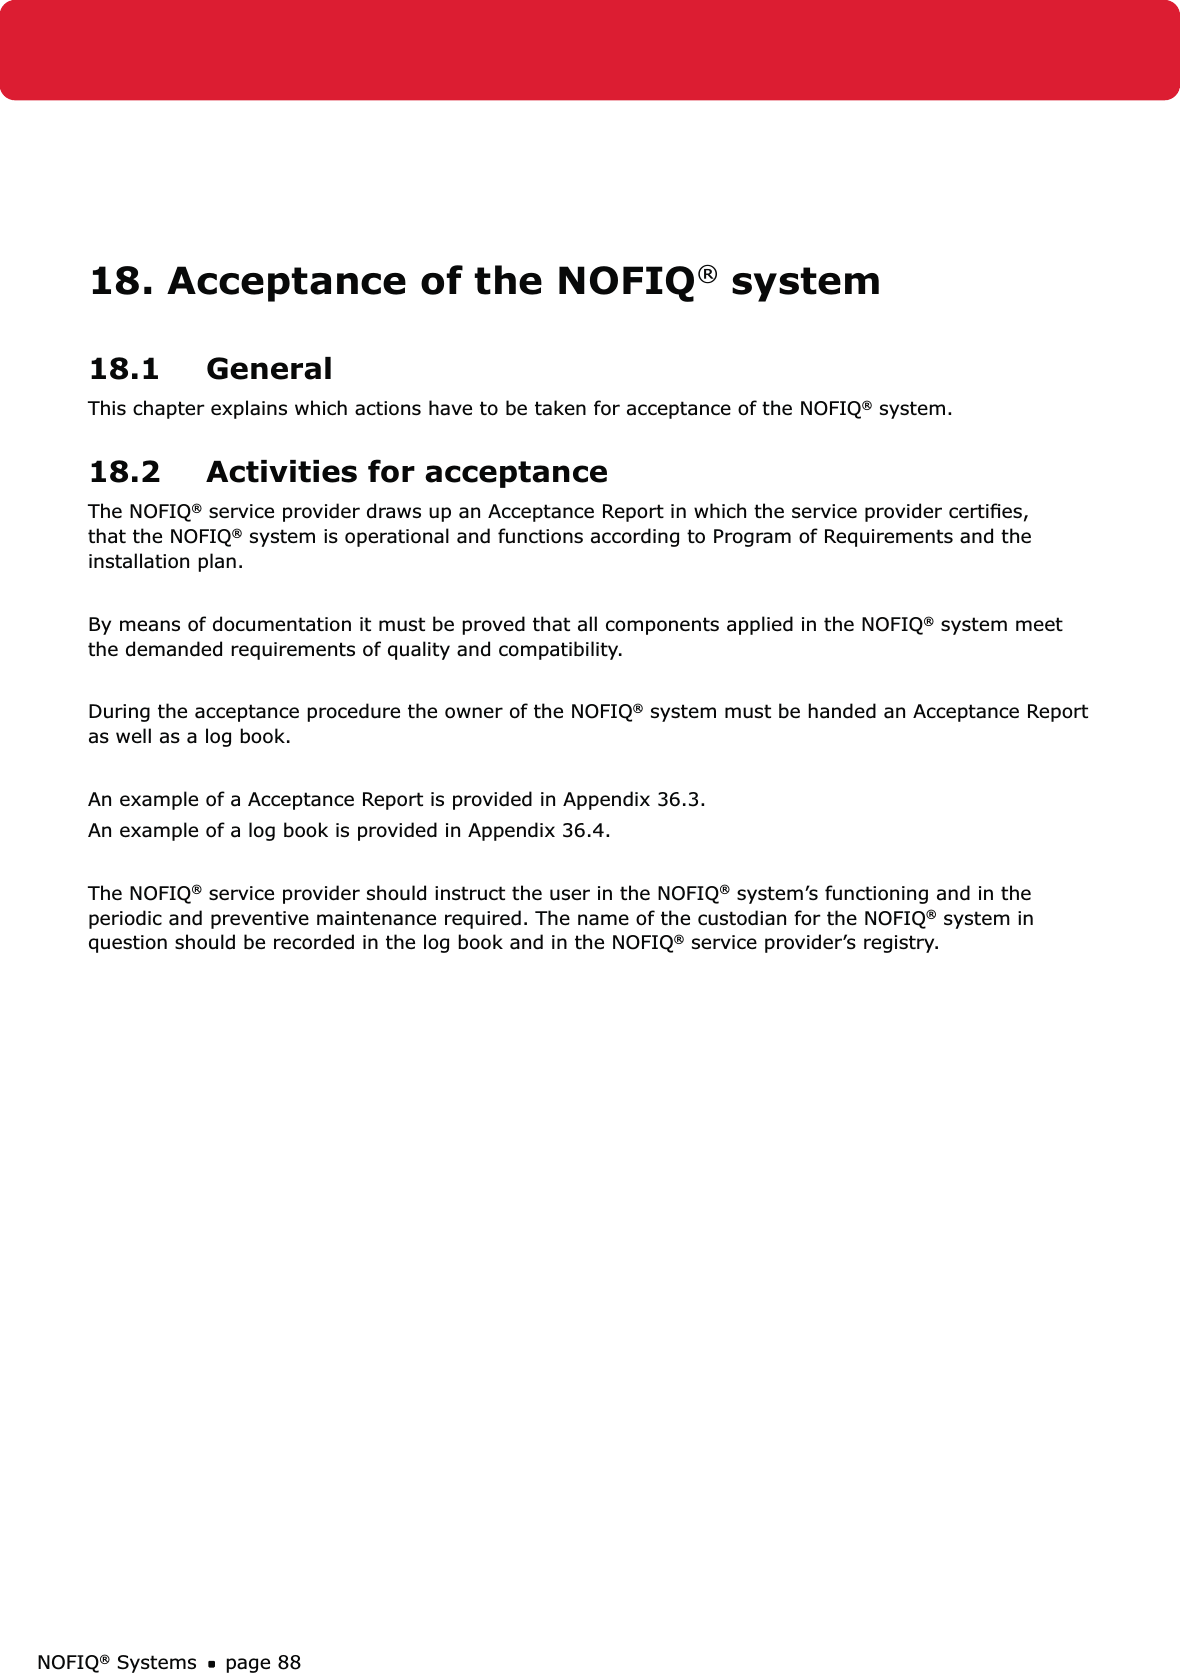 NOFIQ® Systems page 8818. Acceptance of the NOFIQ® system18.1 GeneralThis chapter explains which actions have to be taken for acceptance of the NOFIQ® system.18.2  Activities for acceptanceThe NOFIQ® service provider draws up an Acceptance Report in which the service provider certiﬁes, that the NOFIQ® system is operational and functions according to Program of Requirements and the installation plan. By means of documentation it must be proved that all components applied in the NOFIQ® system meet the demanded requirements of quality and compatibility. During the acceptance procedure the owner of the NOFIQ® system must be handed an Acceptance Report as well as a log book. An example of a Acceptance Report is provided in Appendix 36.3.An example of a log book is provided in Appendix 36.4.The NOFIQ® service provider should instruct the user in the NOFIQ® system’s functioning and in the periodic and preventive maintenance required. The name of the custodian for the NOFIQ® system in question should be recorded in the log book and in the NOFIQ® service provider’s registry.